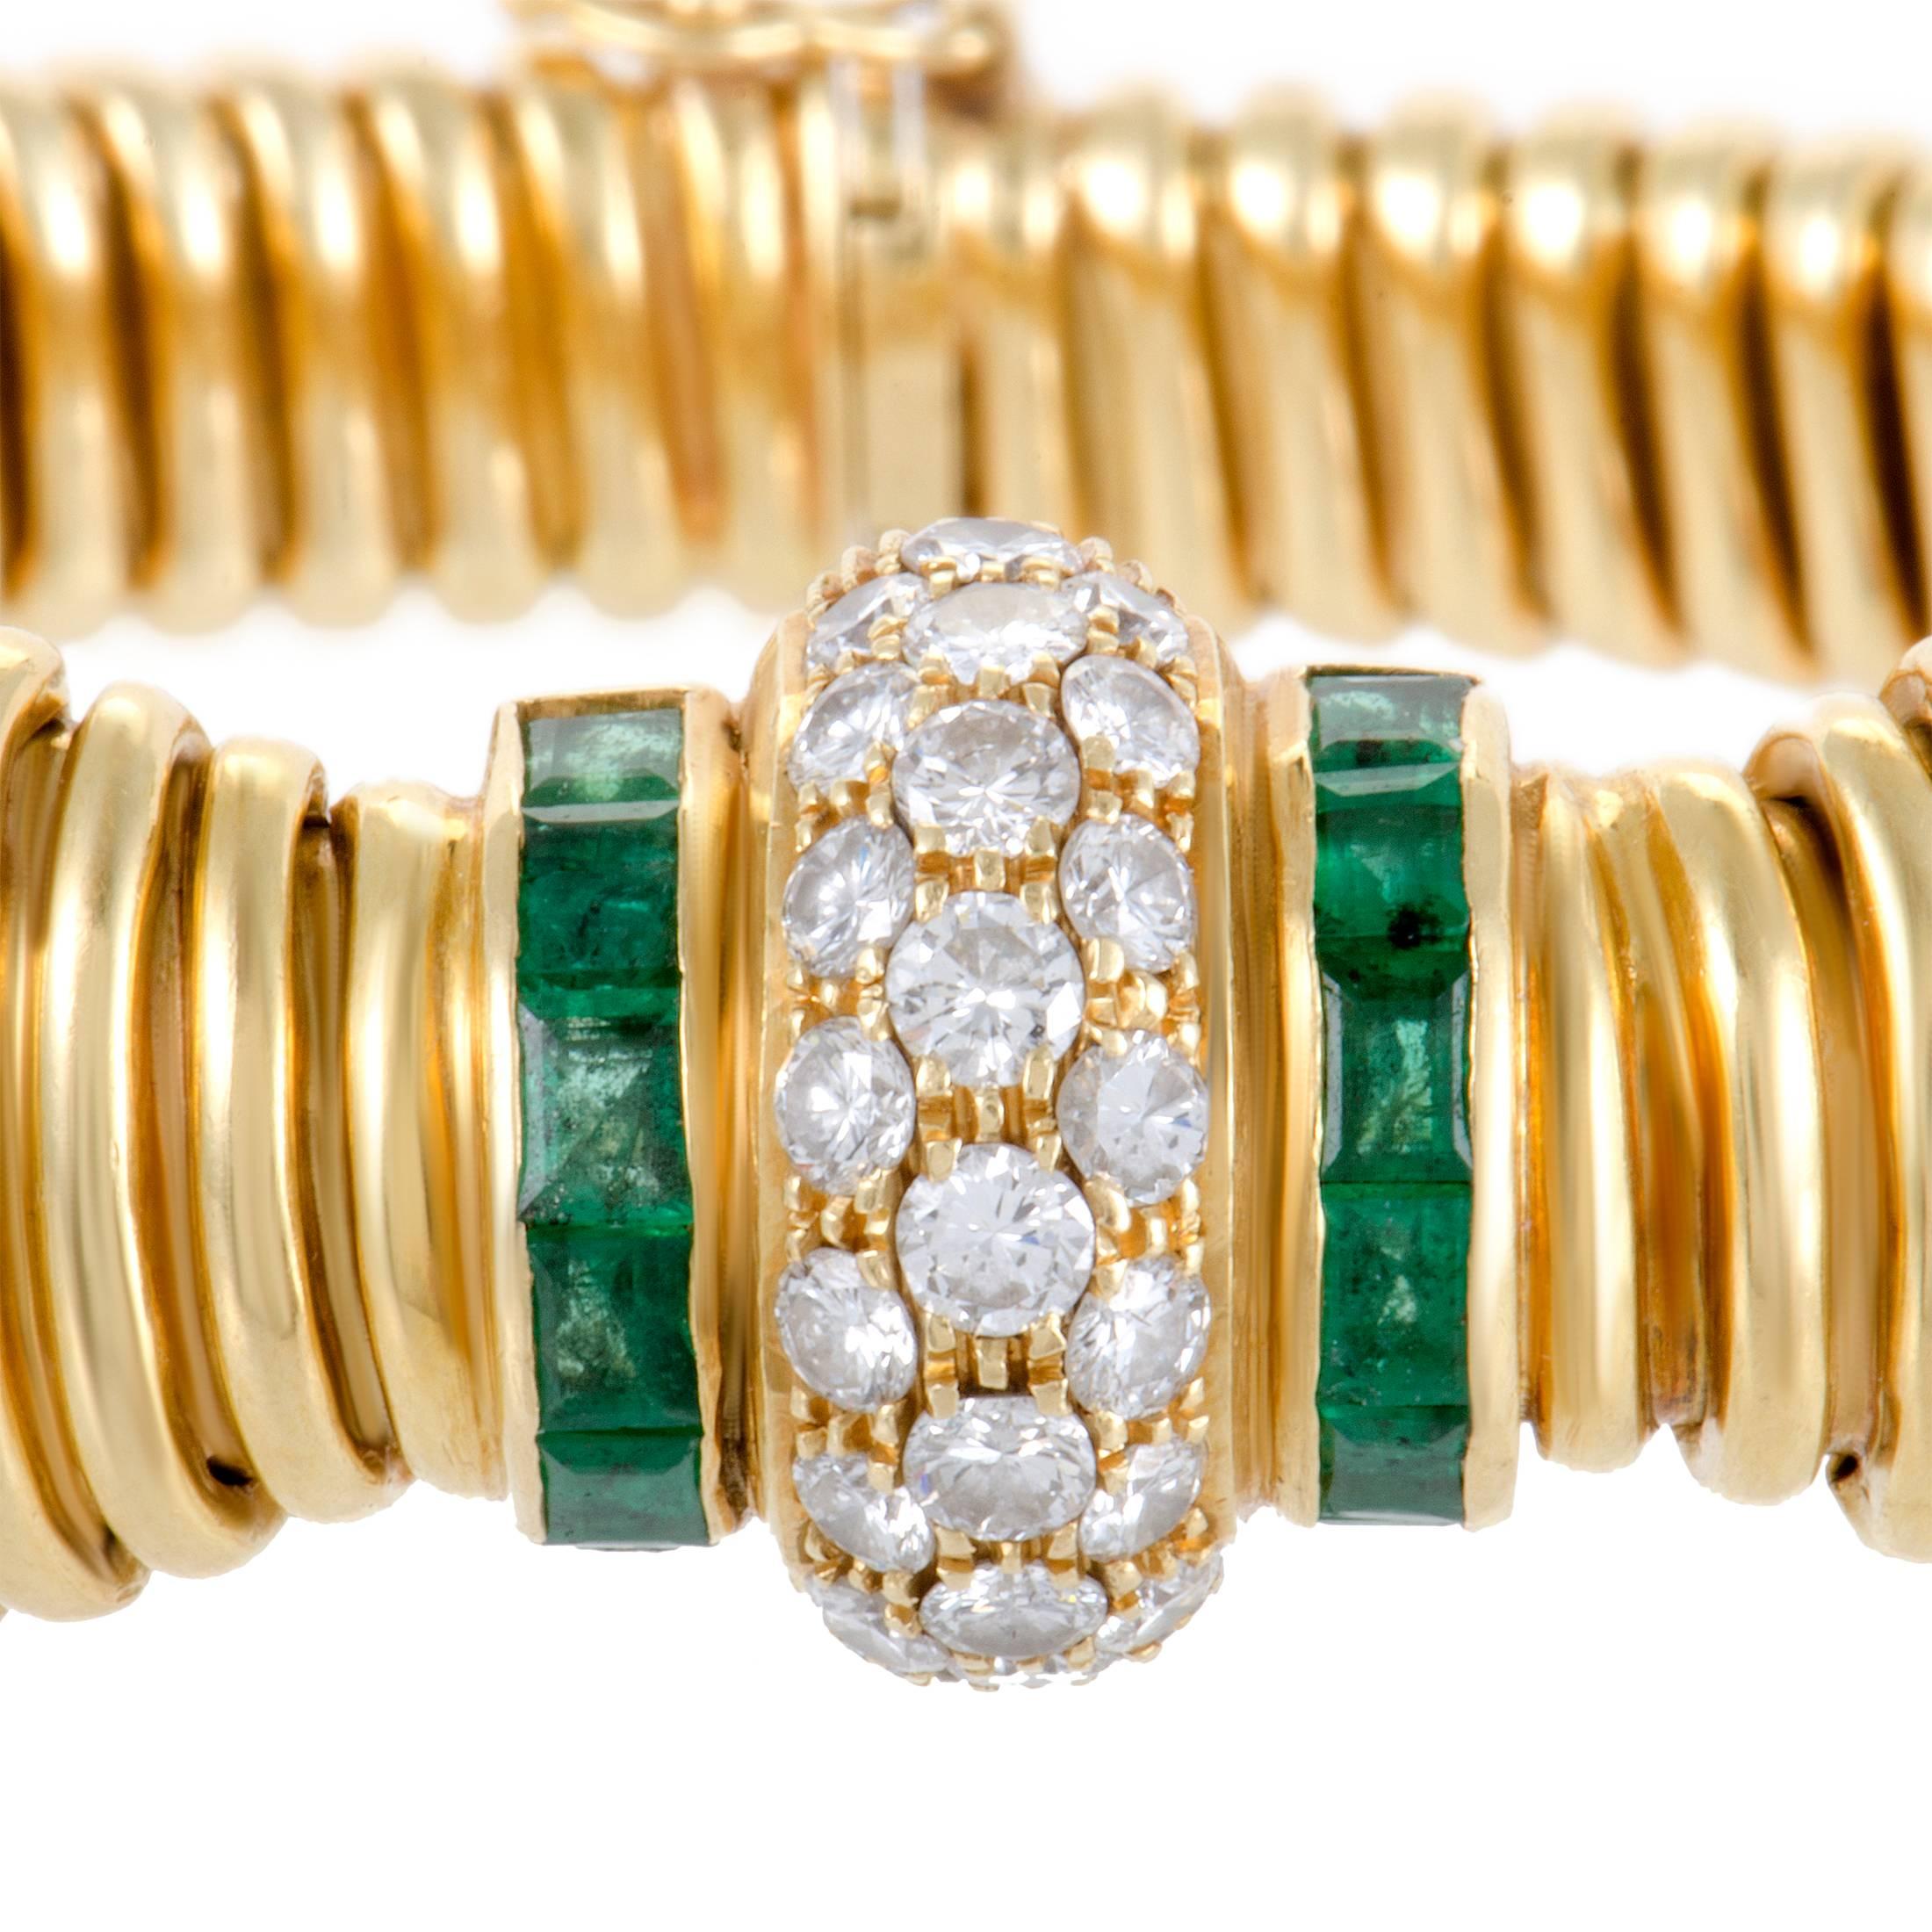 An exceptionally appealing piece, this sublime bracelet designed by Cartier is an item of immense aesthetic value. The bracelet has a flexible design, and is made of 18K yellow gold and embellished with 1.00 carat of emeralds and approximately 1.10